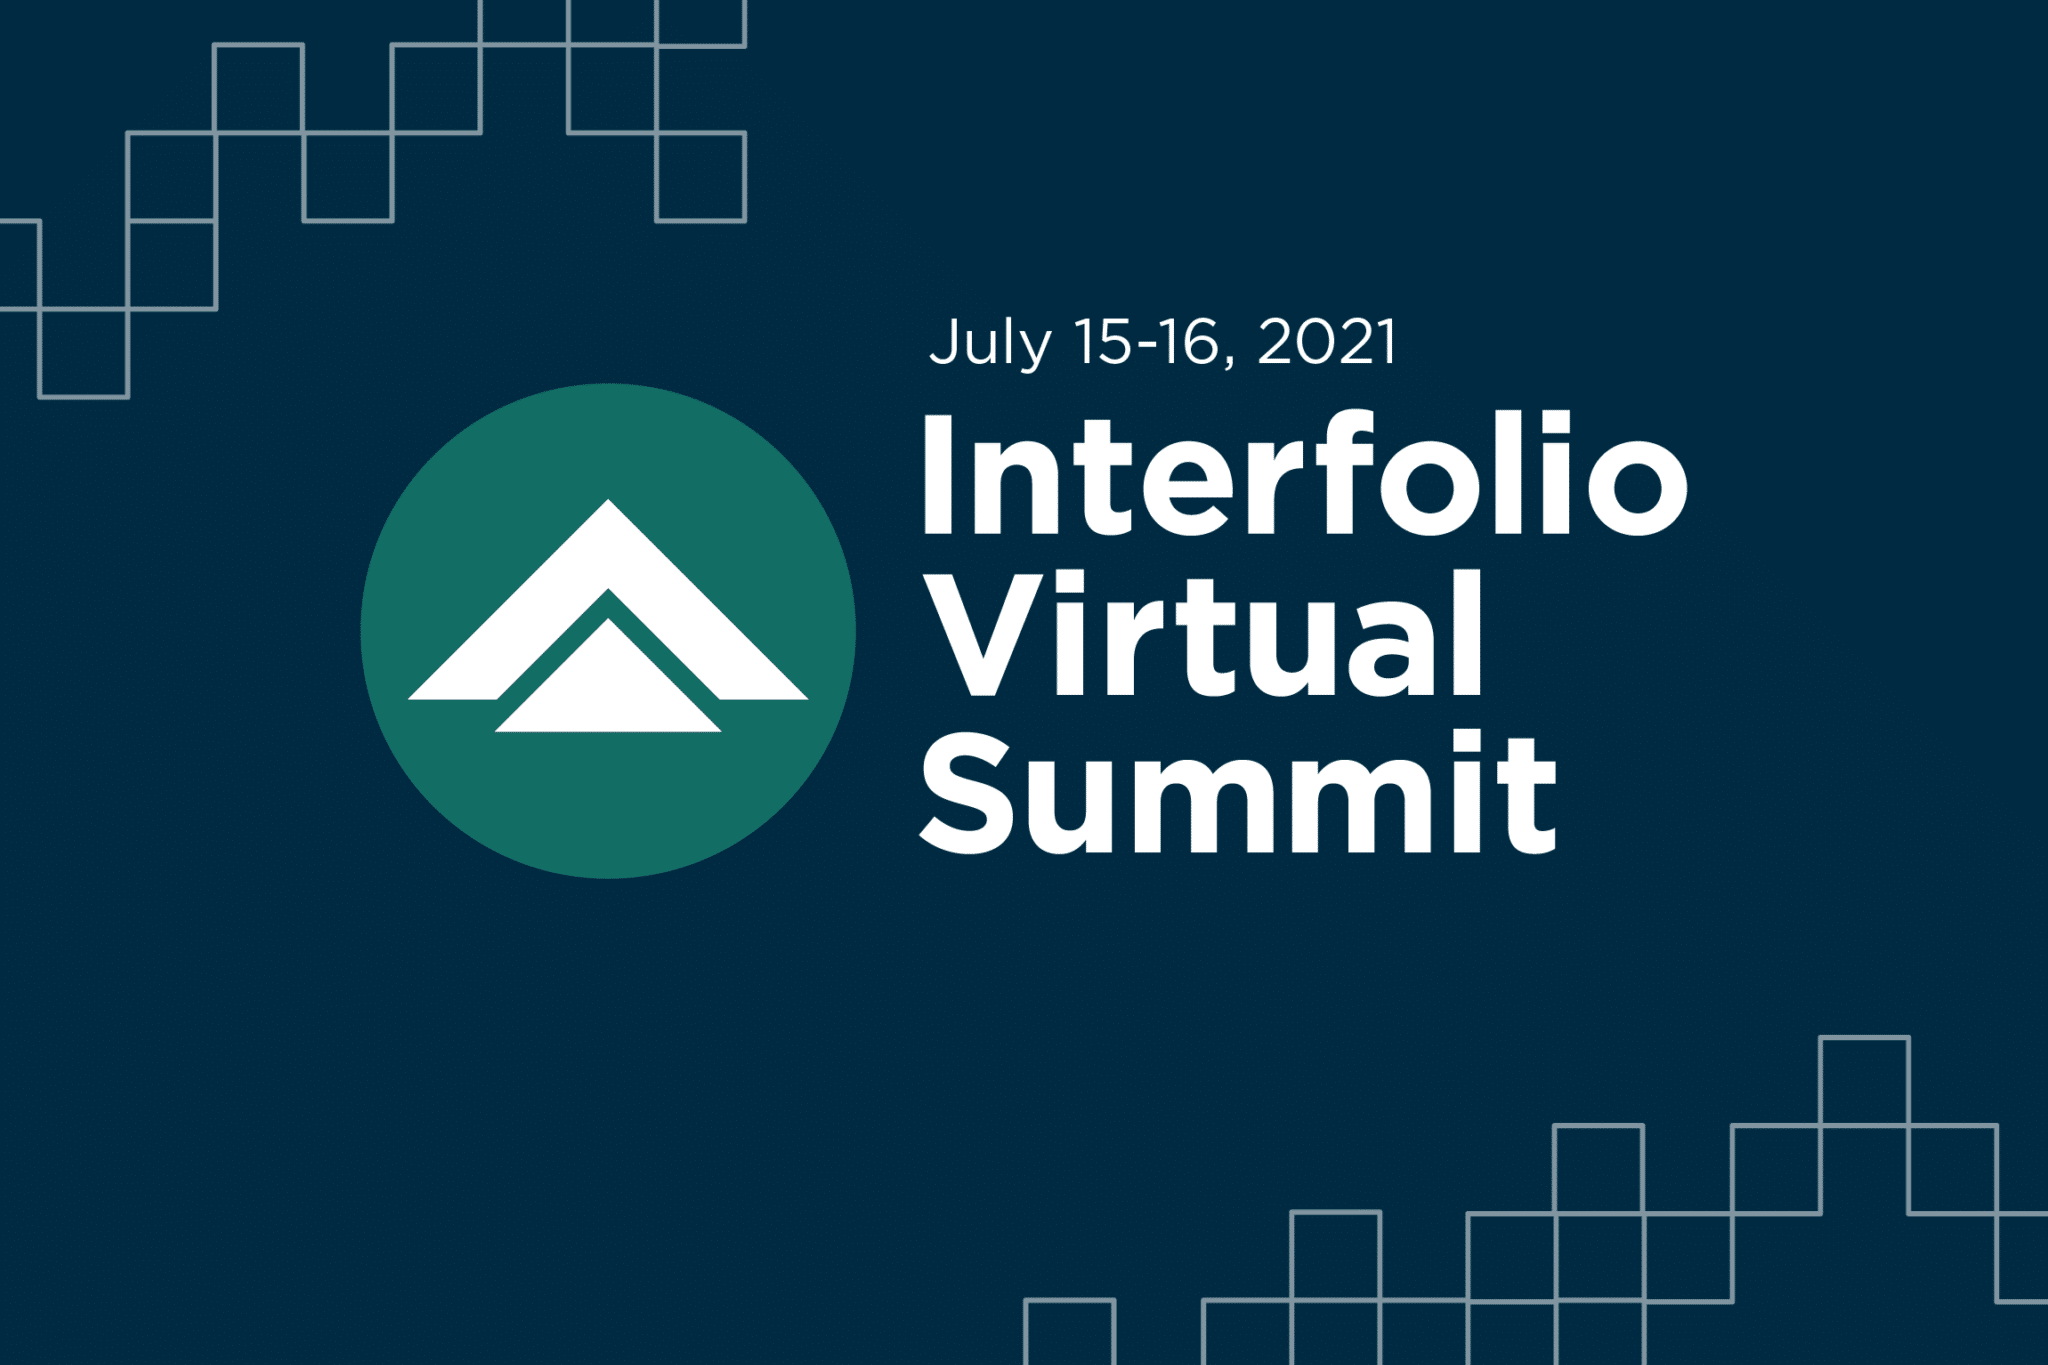 Driving Faculty Affairs Success: Notes from the 2021 Interfolio Summit